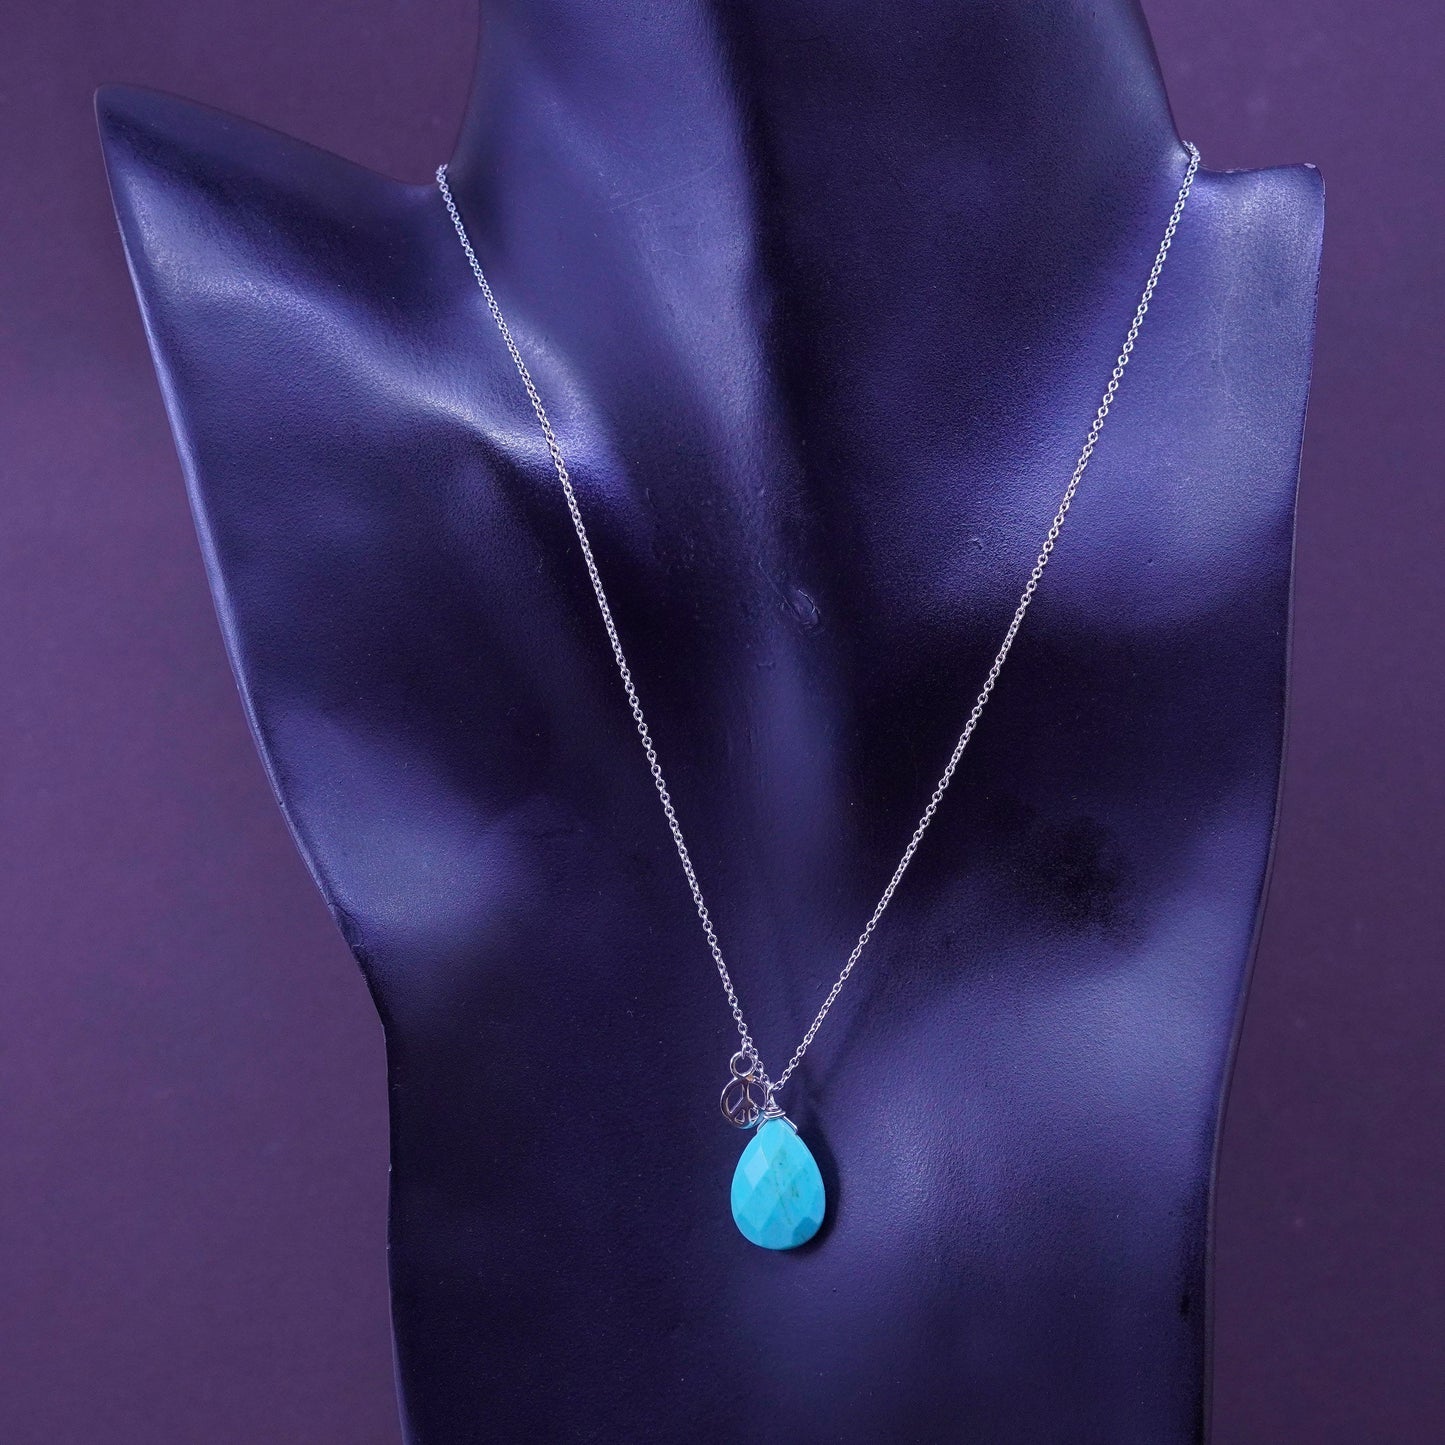 18”, sterling silver handmade necklace, 925 circle chain with turquoise pendant